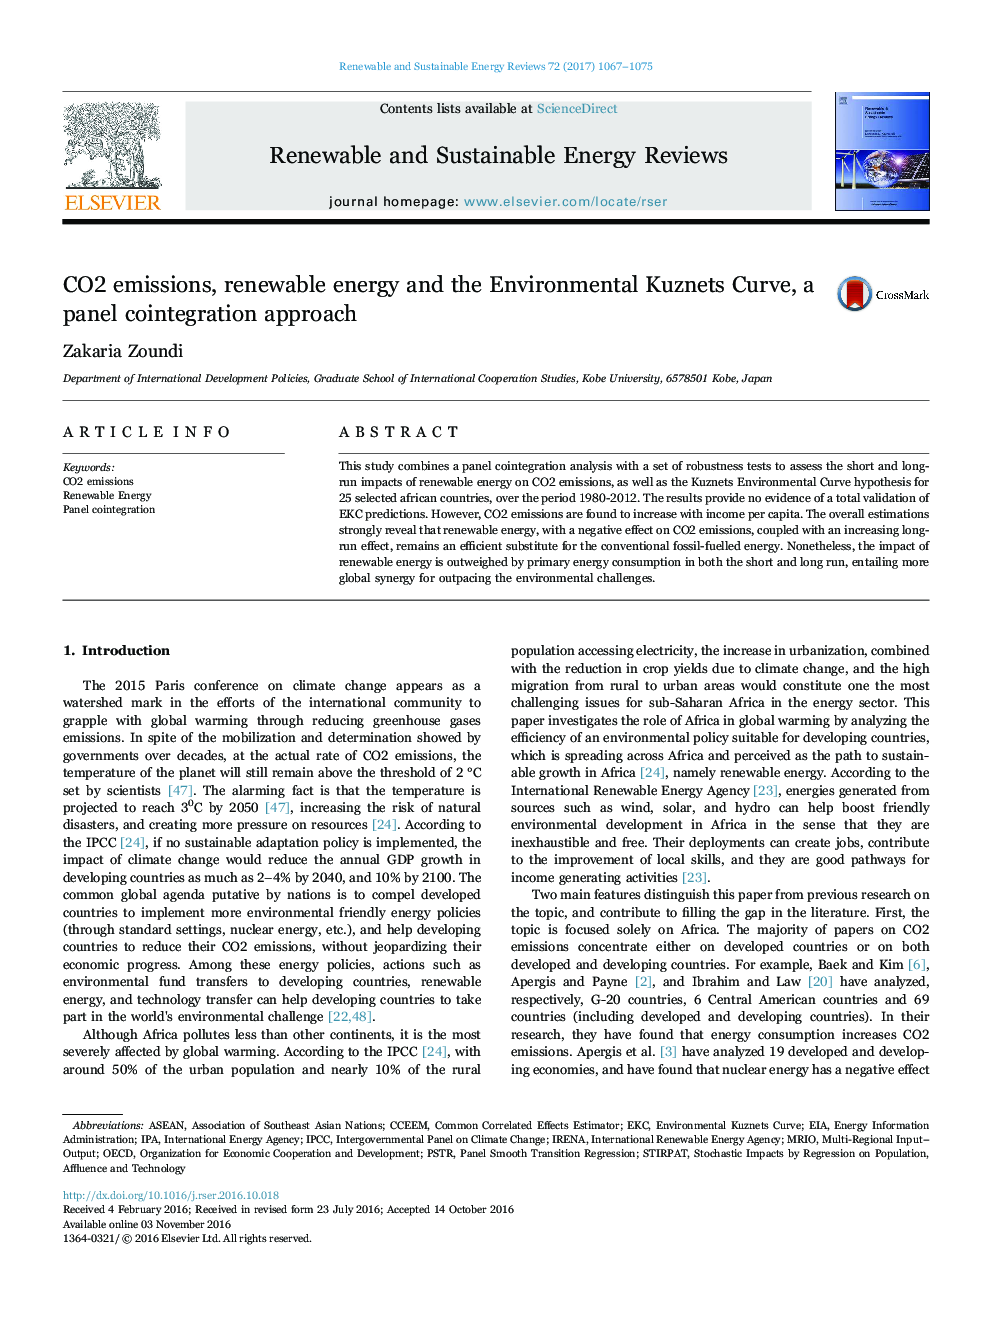 CO2 emissions, renewable energy and the Environmental Kuznets Curve, a panel cointegration approach